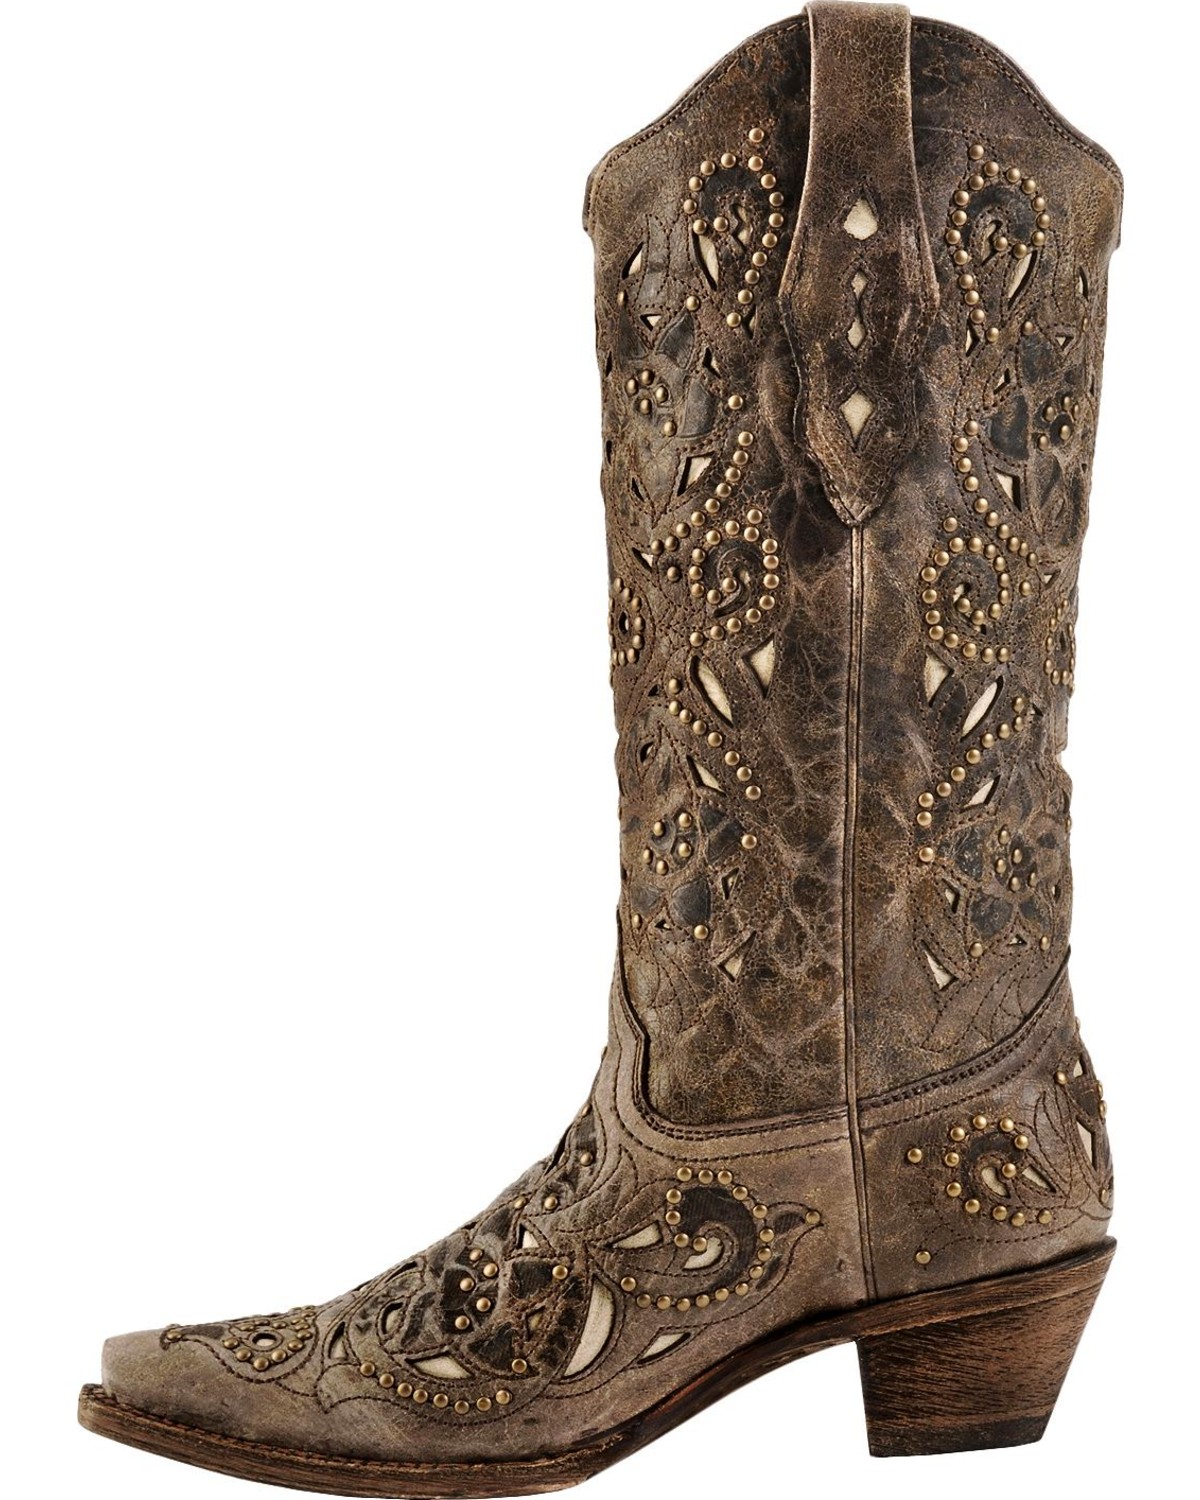 Corral Women's Stud and Inlay Western Boots | Boot Barn